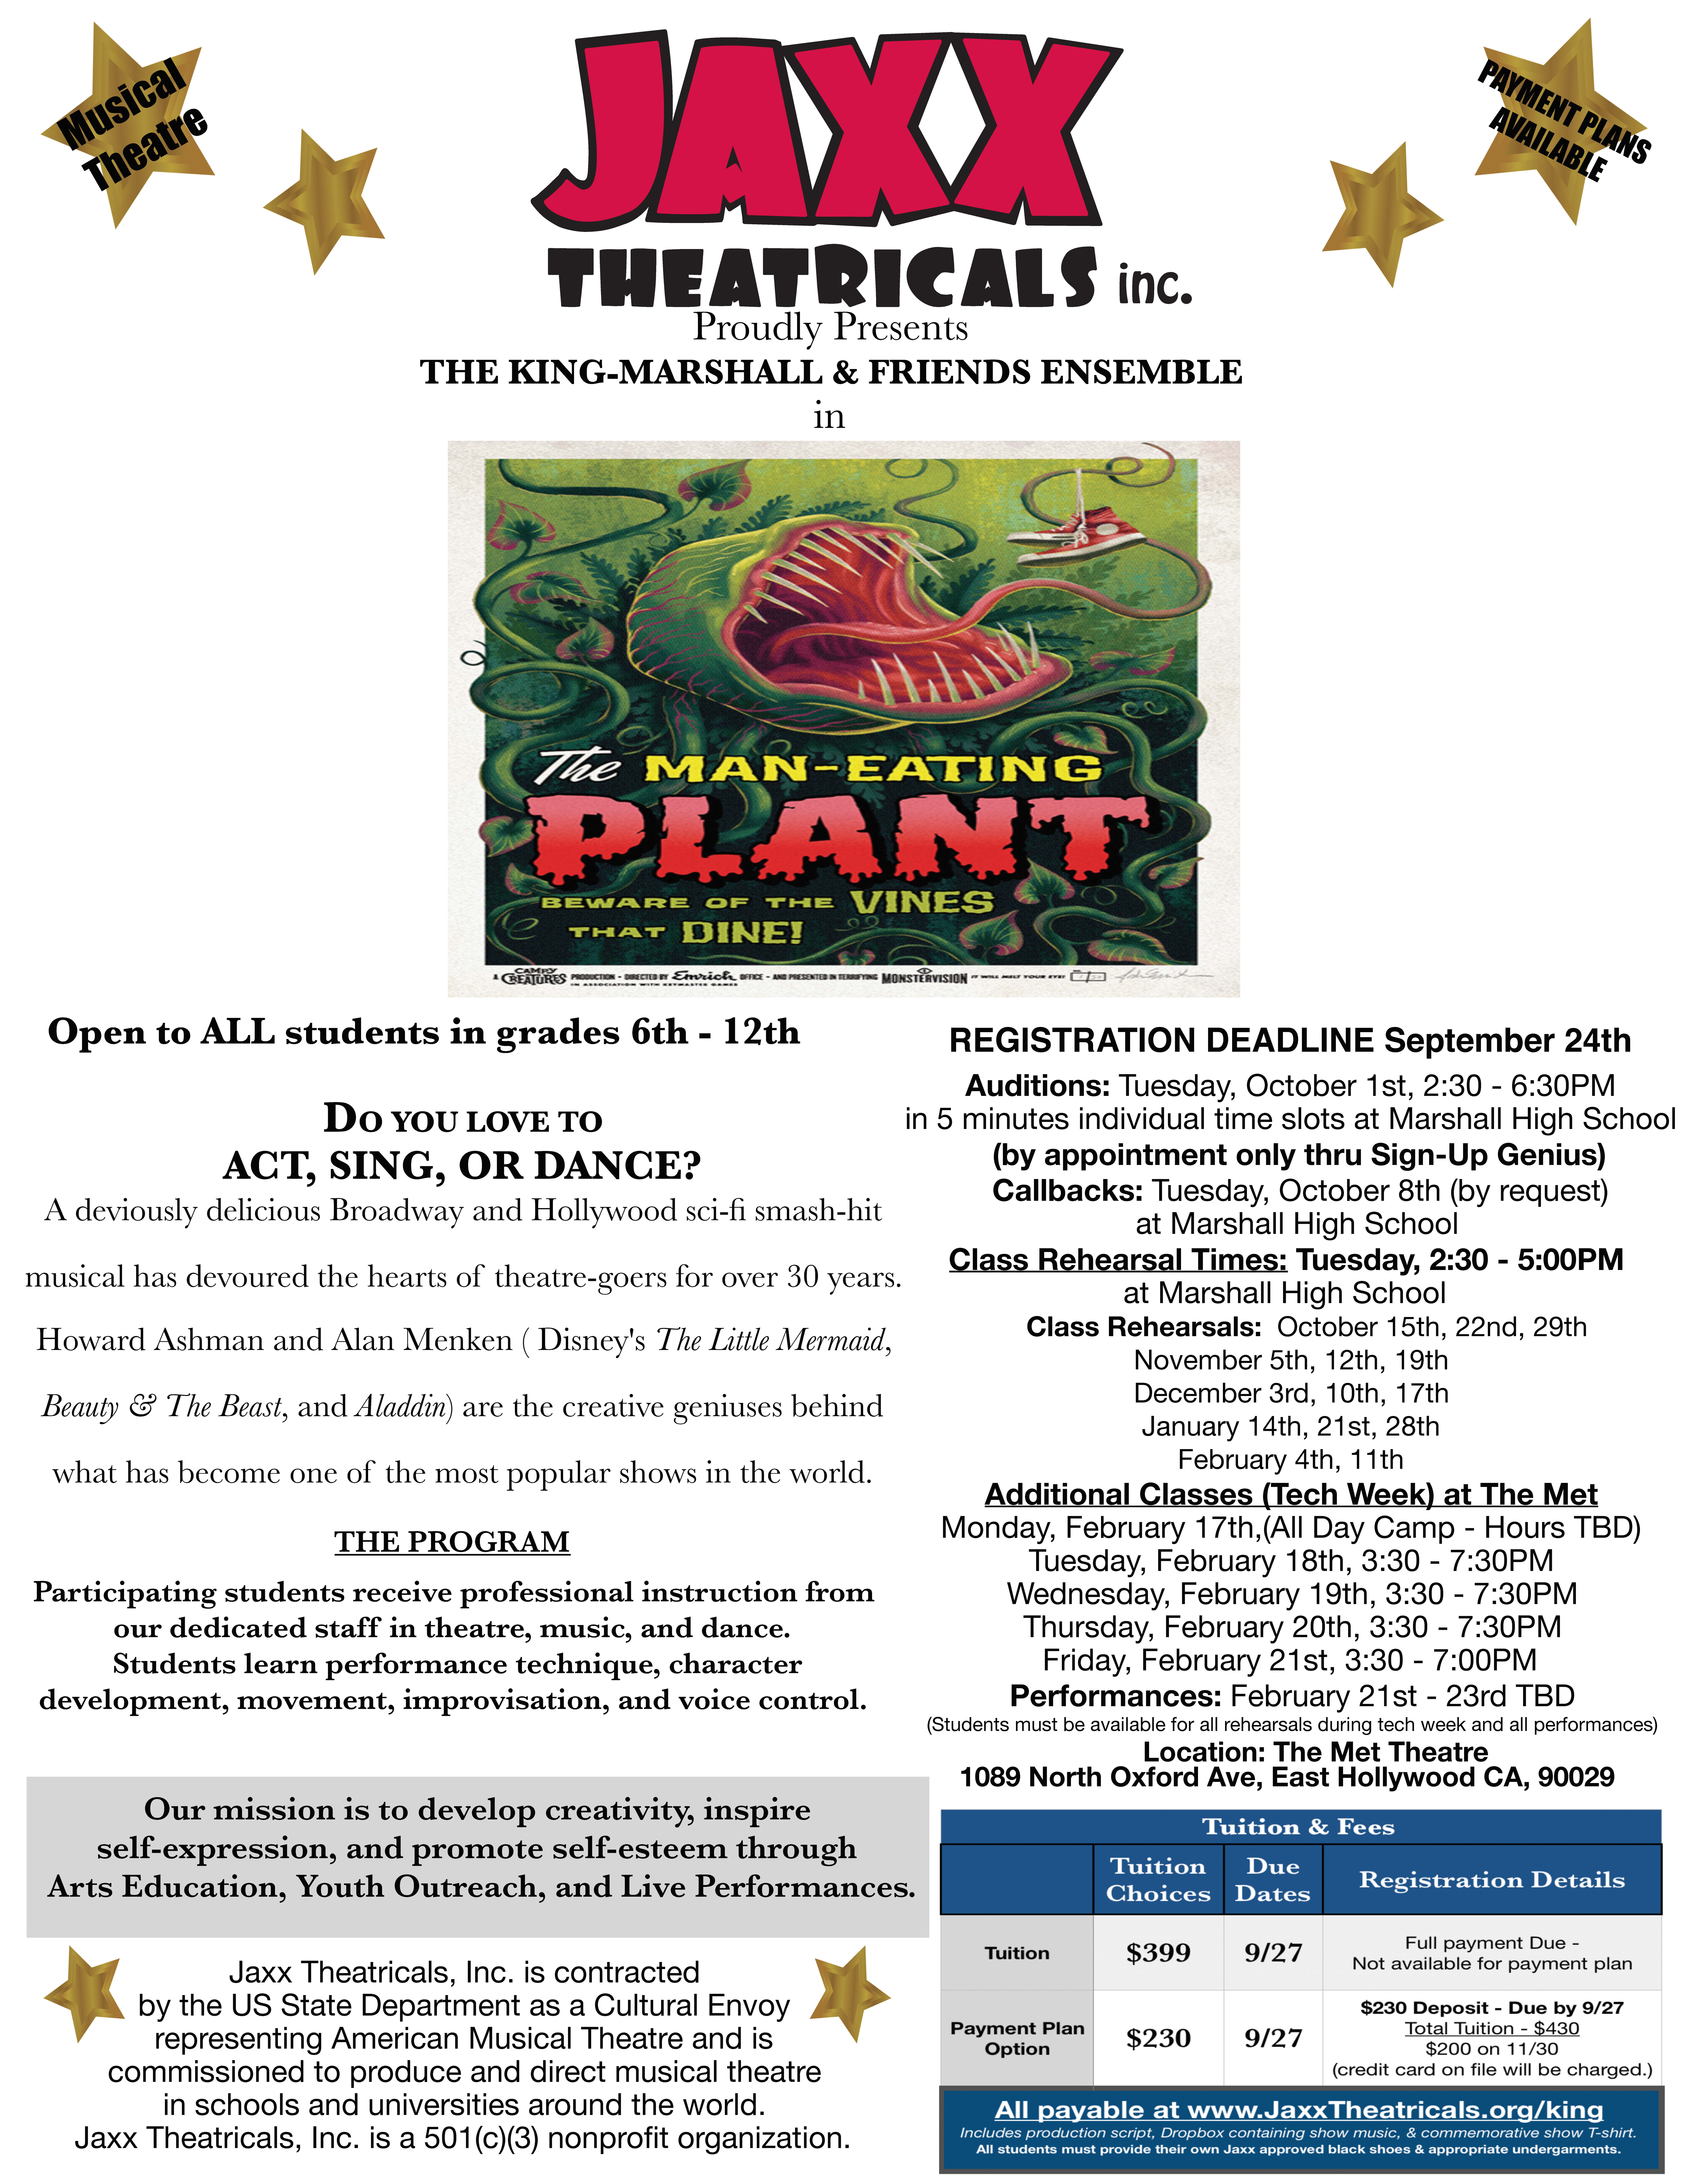 Time to audition for Jaxx Theatricals presents The Man-Eating Plant